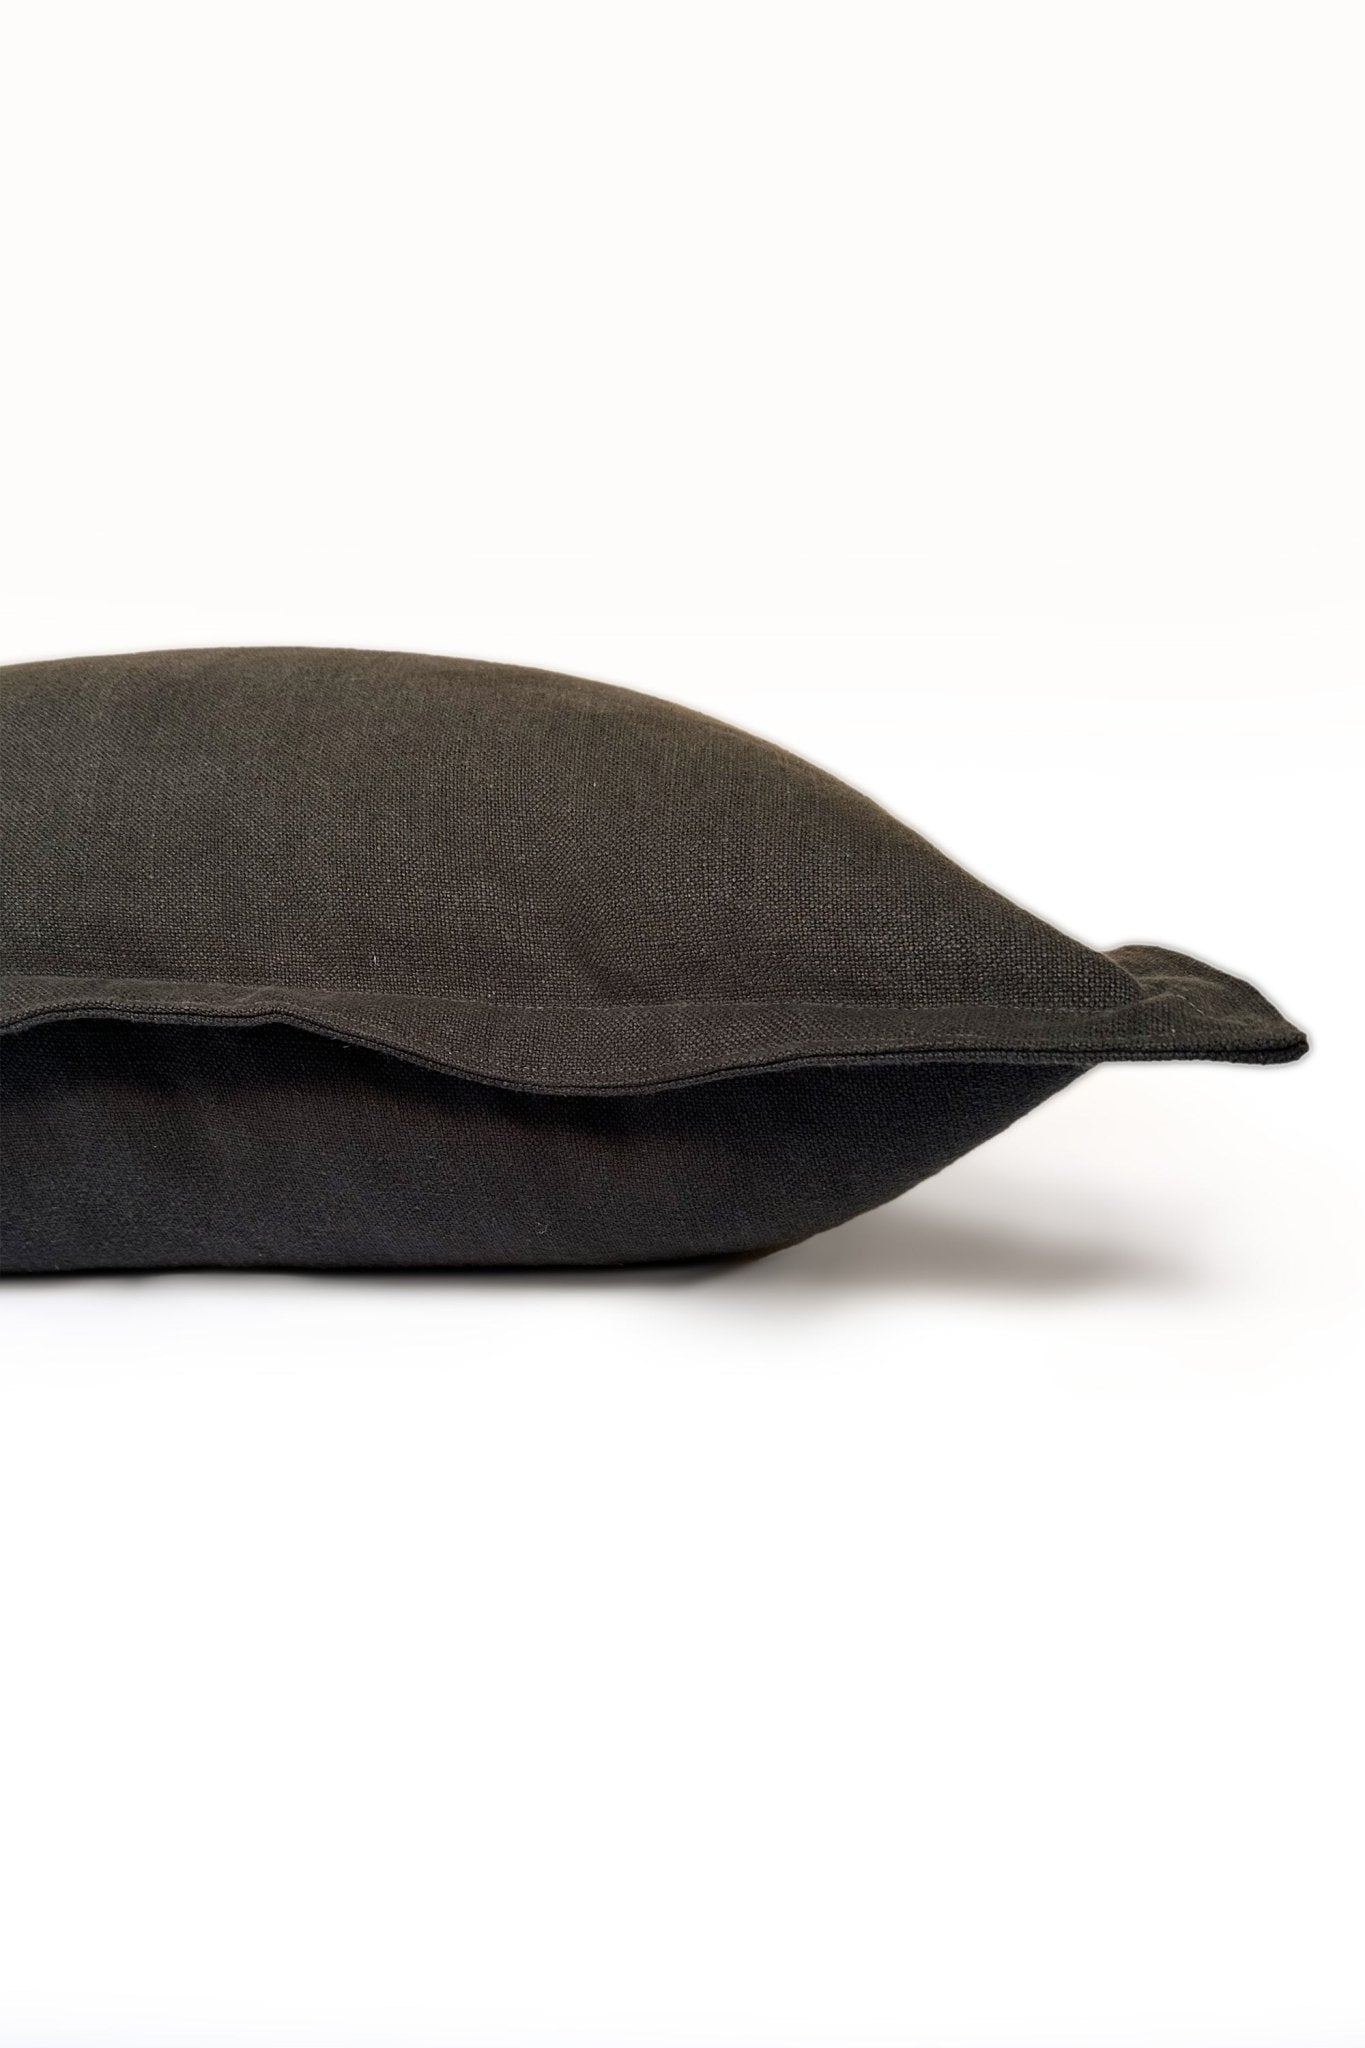 Utility Linen Oxford Cushion Cover in Charcoal Grey - Biggs & Hill - Cushion Covers - 18 inch - 24 inch - 30 inch